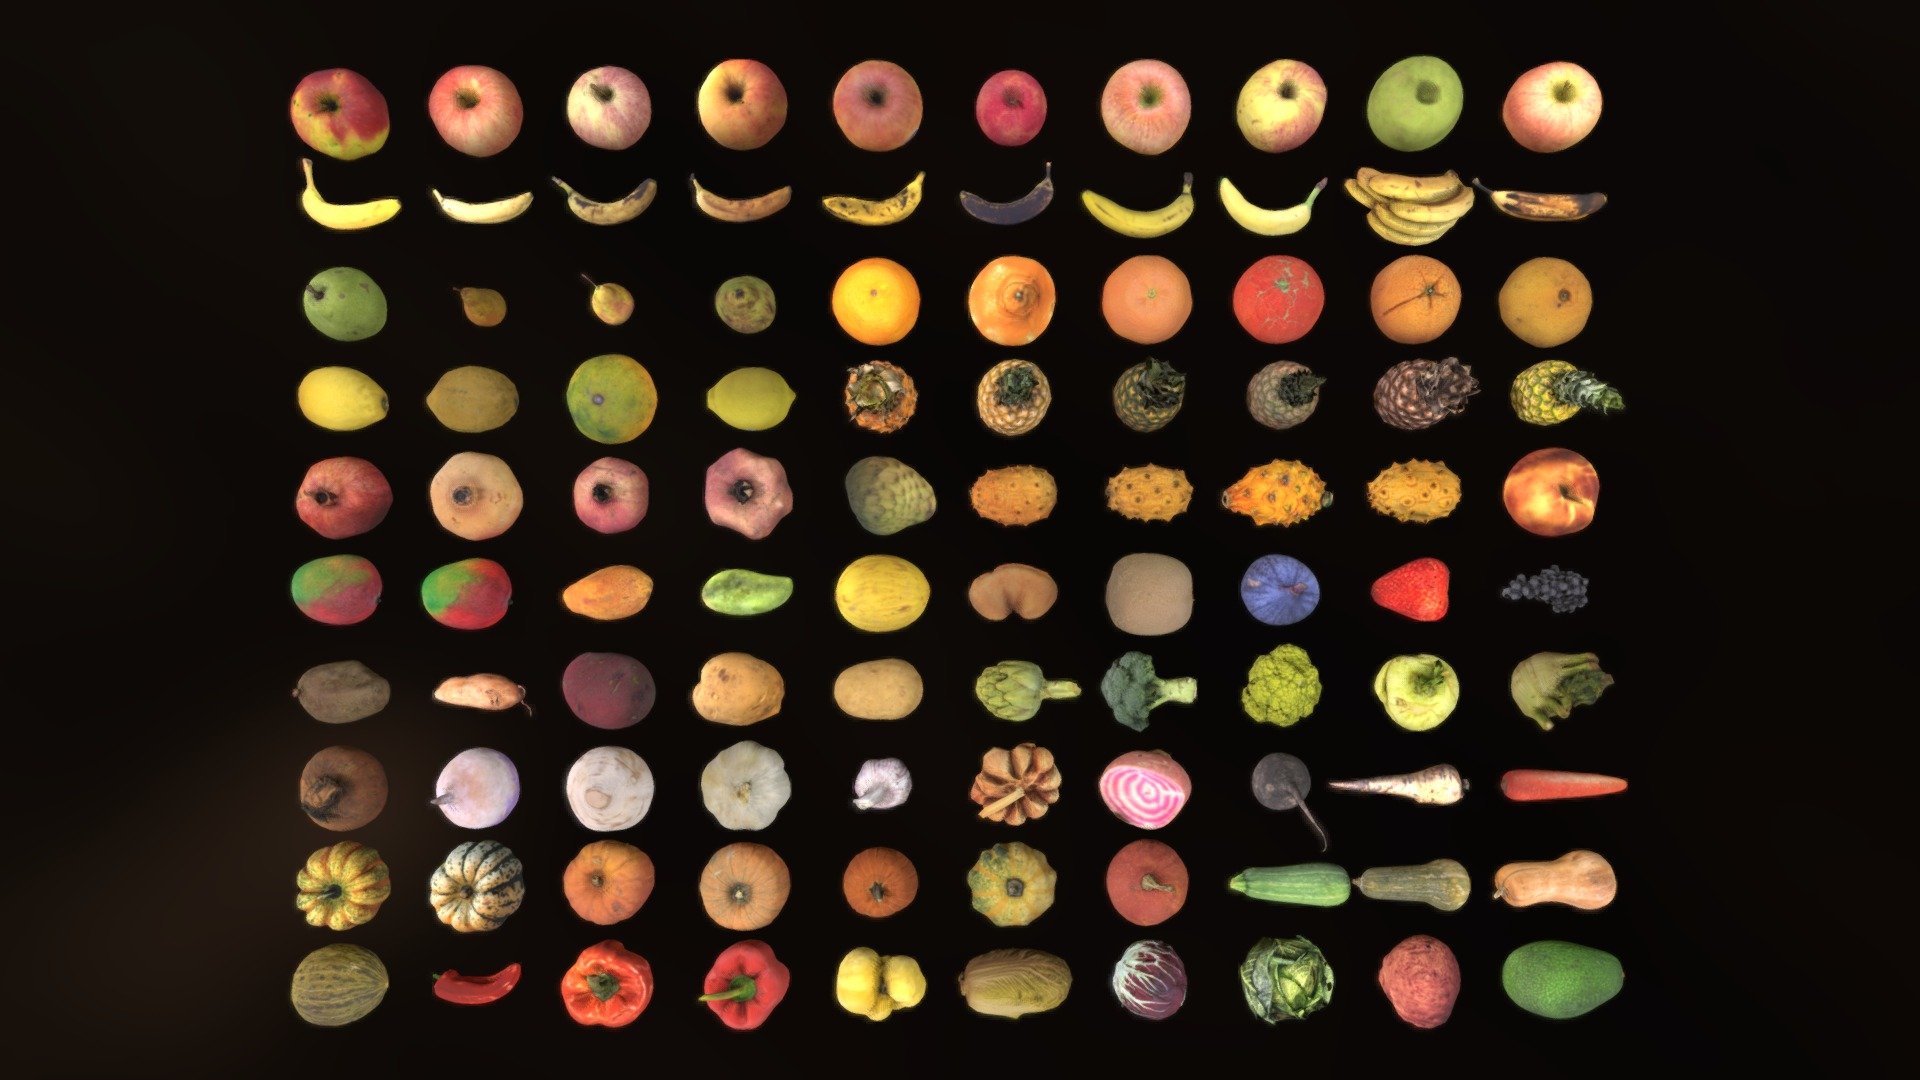 A collection of lowpoly scanned fruits and vegetables, ready to use in game engines, as particles or for optimized renders. Comes with a demo!

Each model is made of ~1000 triangles, and 1024px albedo and normal maps (jpg).

Original scans from @fredfroehlich @seijik42 @linkfredriksson @yonemoto.taiga @xfanta @BSlegt @tux @parallelo.d @daniel132 @chytamrealitu @all_scan_everything @NestorMarques @nick_wiggins @arqus3d @aquateknica @nate_sid @marcovolino @nedo @nebulousflynn @james @calidos @mantasT @cimtech @semblance @3dhdscan @abbyec @gavez @simonspata @jledergerber @Duplicate3d @mauricesvay @curiofawkstrawt @myscan @Madman05 @sheepfilms @xiezhong @epipolar @ken.varner @gregoryarbit @Reductio @jtuhtan @czheiko @scansource3d @animator12 @vibrantnebula @rigsters @tscheer @etatech3d @nunommf @corralsanti @topfrank2013 @khoi3d @carlosfaustino @mik1190 @LittleNinja @moonsoon @gbrlmenchen @ronjart @fablabpr @afinia3dprint @s.eienberger @mark.energy @digitizedesigns @kraskod @aellis43 - Lowpoly Fruits & Vegetables - Download Free 3D model by Loïc Norgeot (@norgeotloic) 3d model